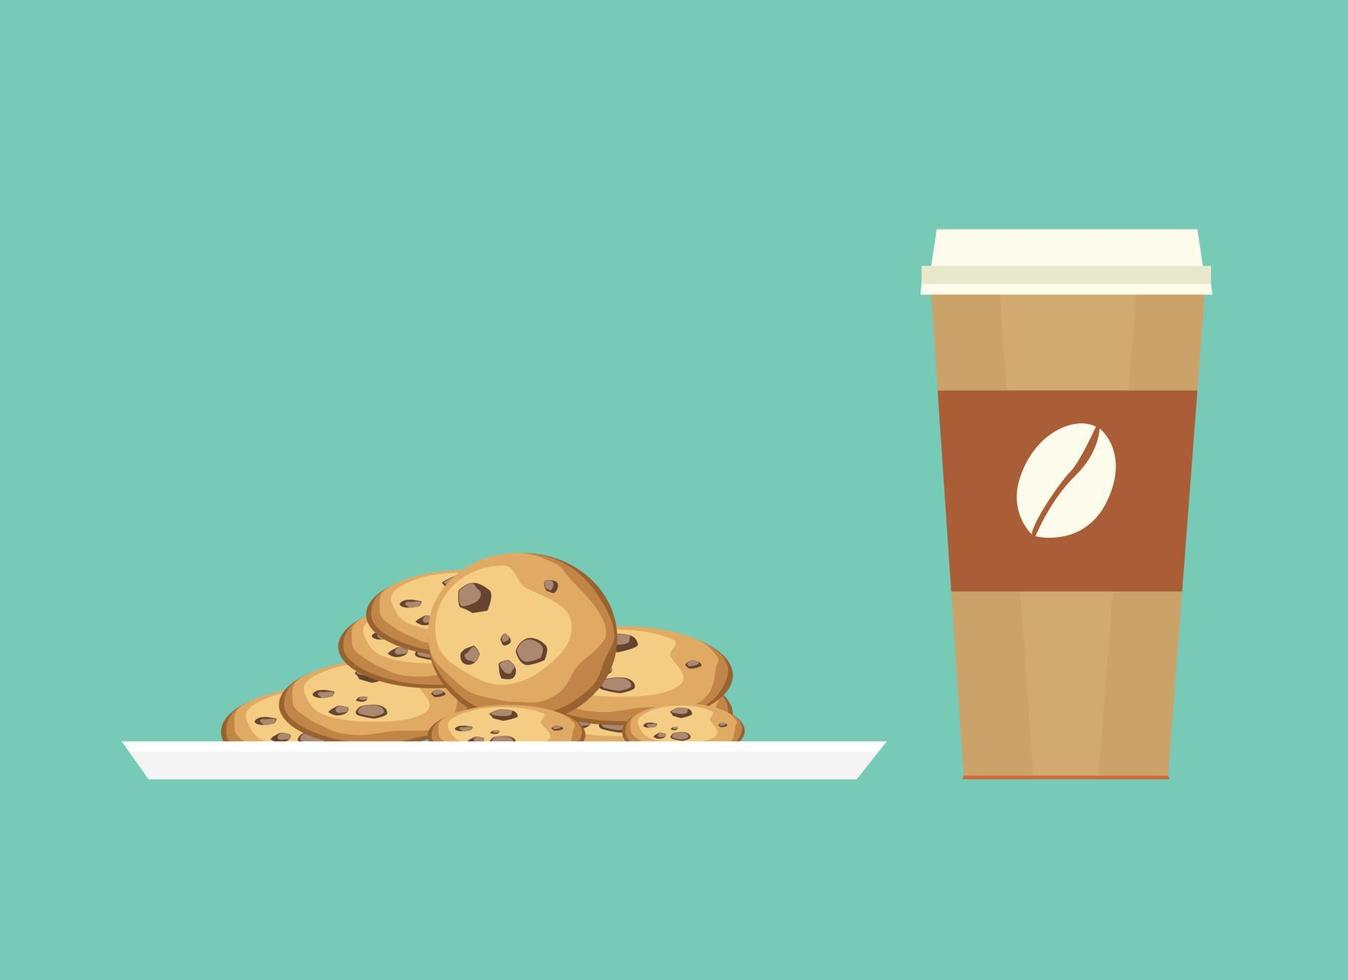 chocolate chip cookies is the best companion to eat together vector